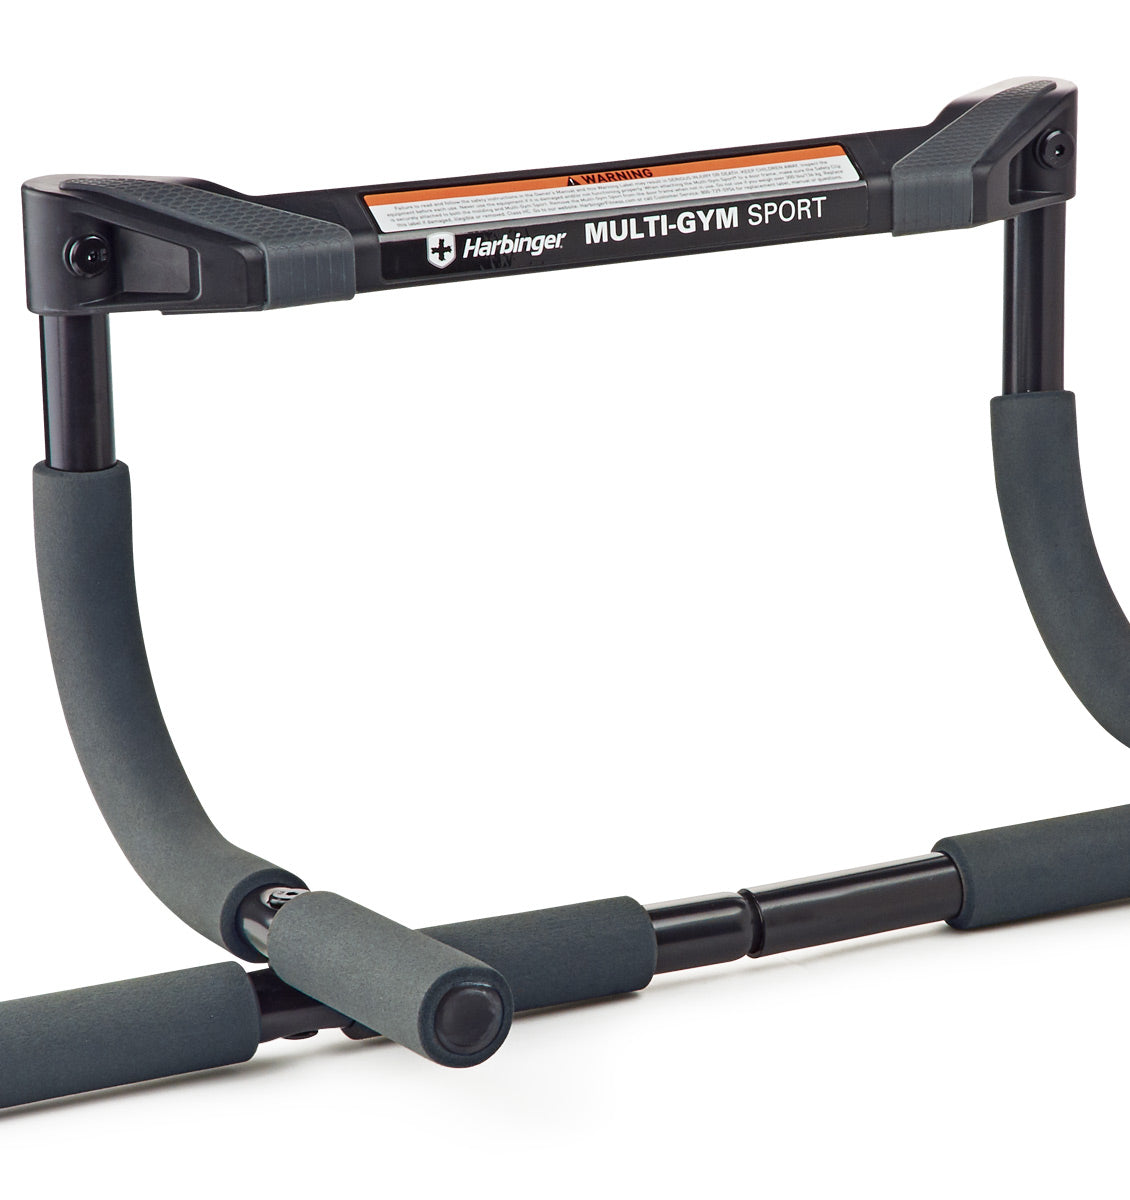 Harbinger Multi Gym Pull-Up Bar - Sport - Top Attachment